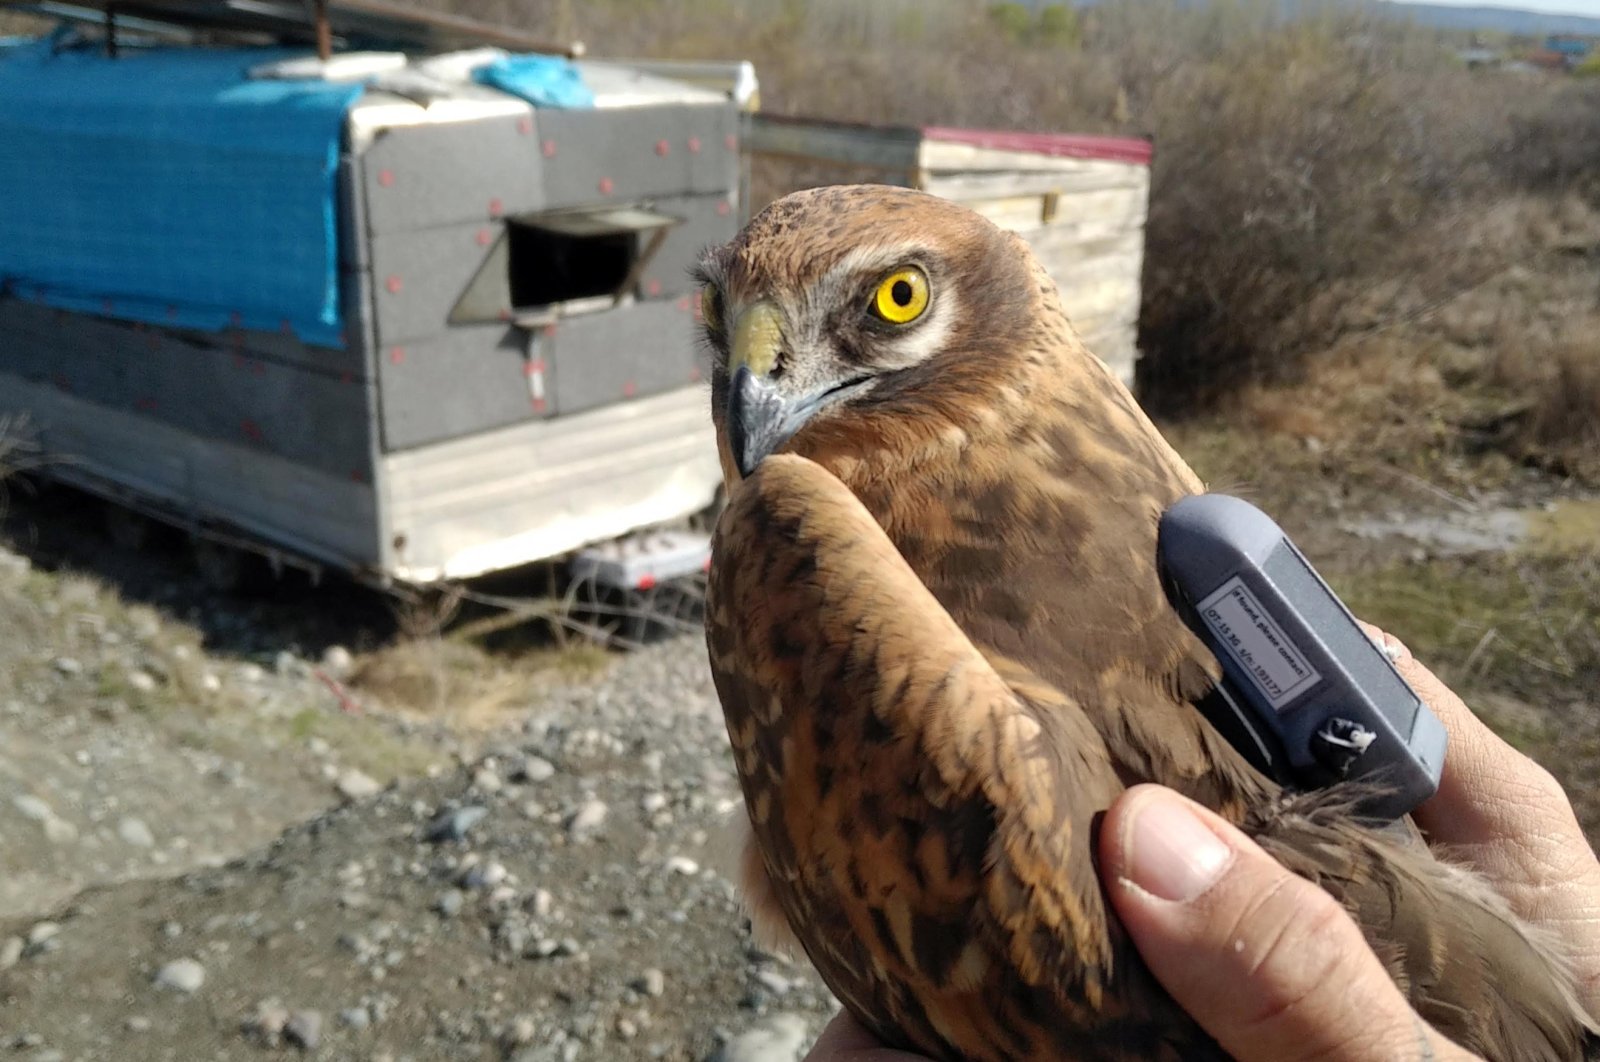 A view of the bird before a GPS device is attached to it, in Iğdır, eastern Turkey, April 25, 2020. (AA Photo)